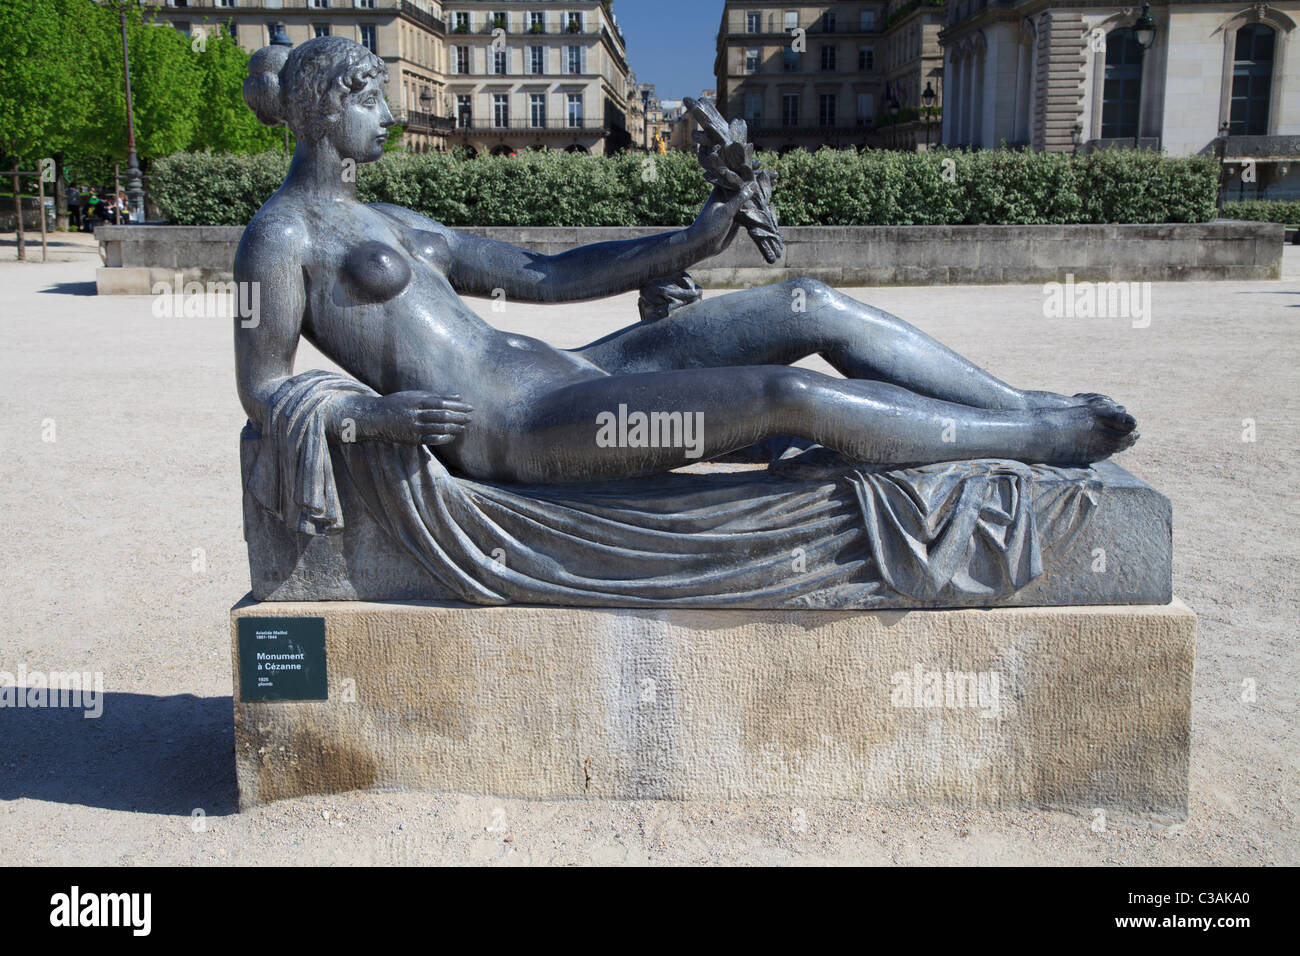 Monument to Cezanne by Maillol outside the Musée des Arts Décoratifs in the Tuileries Garden, Paris Stock Photo